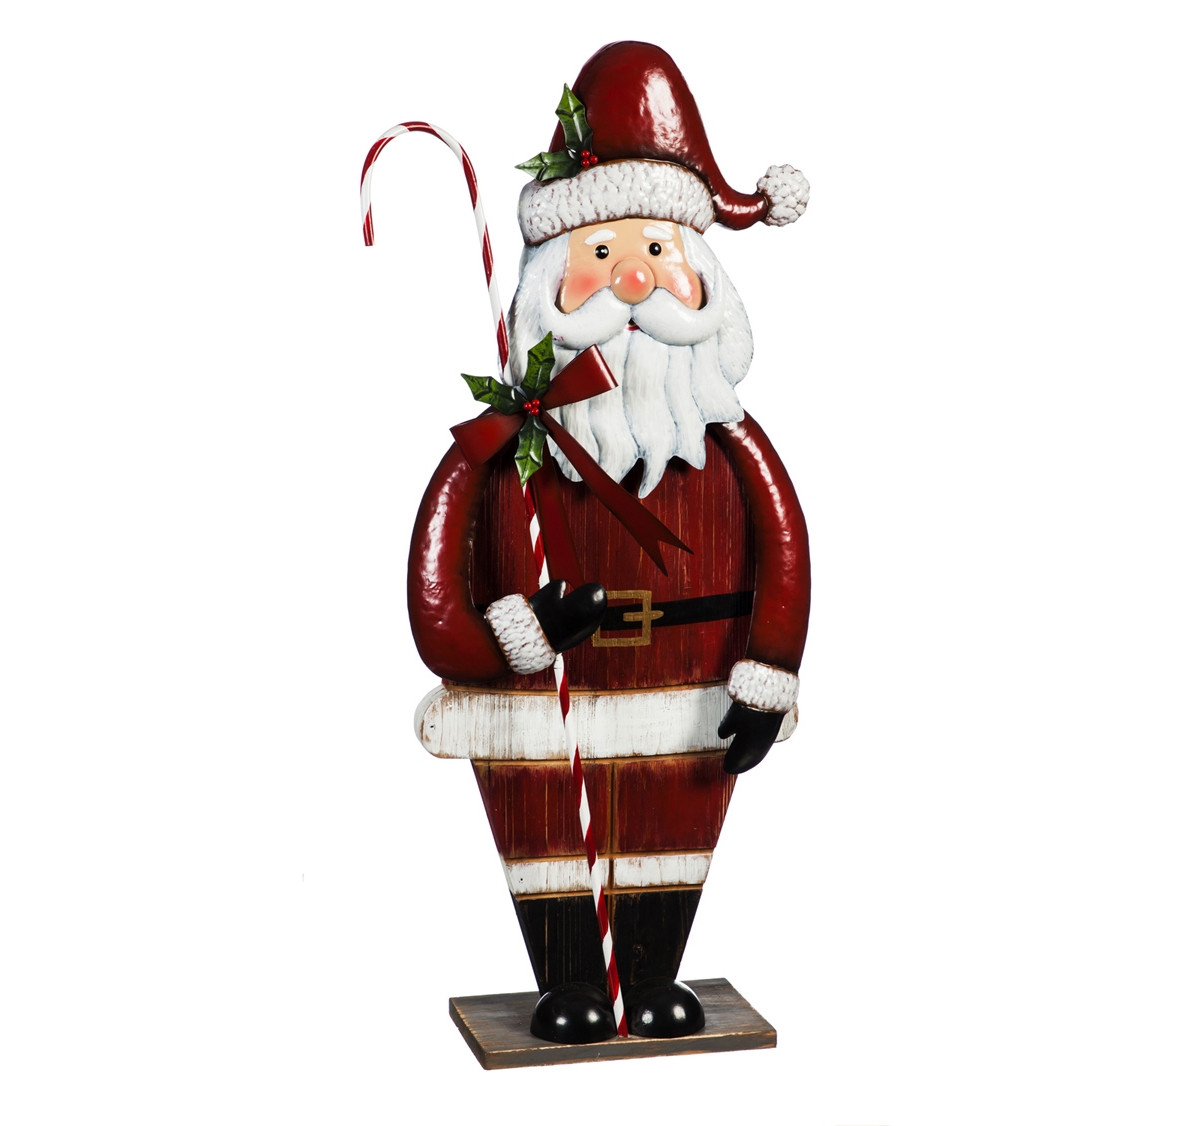 Evergreen 40"h Metal And Wood Santa Statuary Indoor Outdoor Christmas Decor In Multicolored